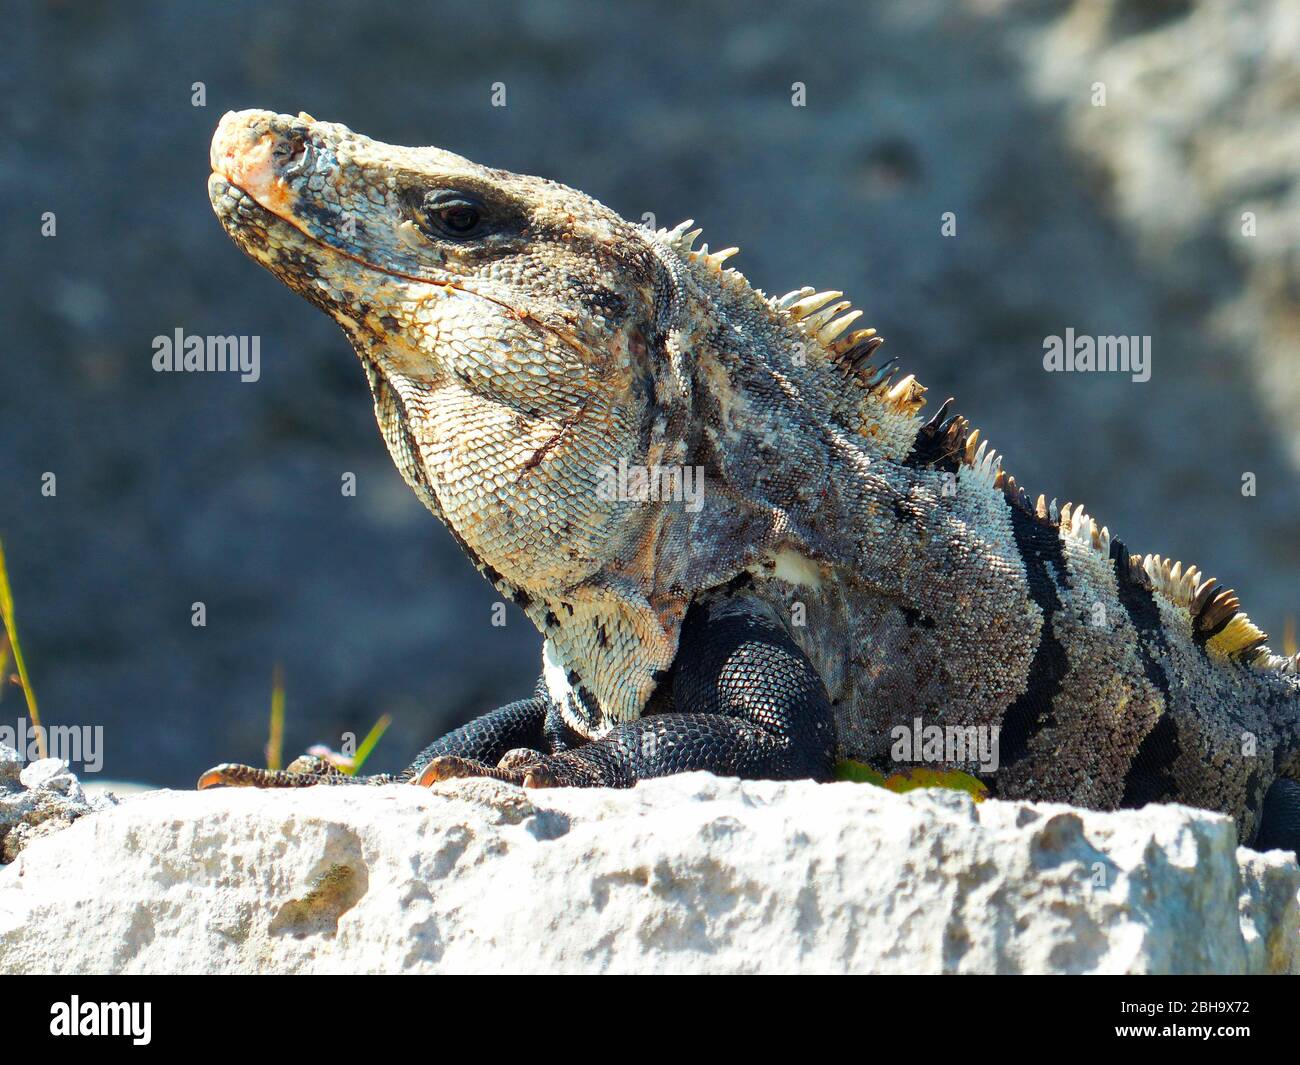 Ctenosaura similis, commonly known as the black spiny-tailed iguana, black iguana, or black ctenosaur, is a lizard native to Mexico and Central America that has been introduced to Florida Stock Photo